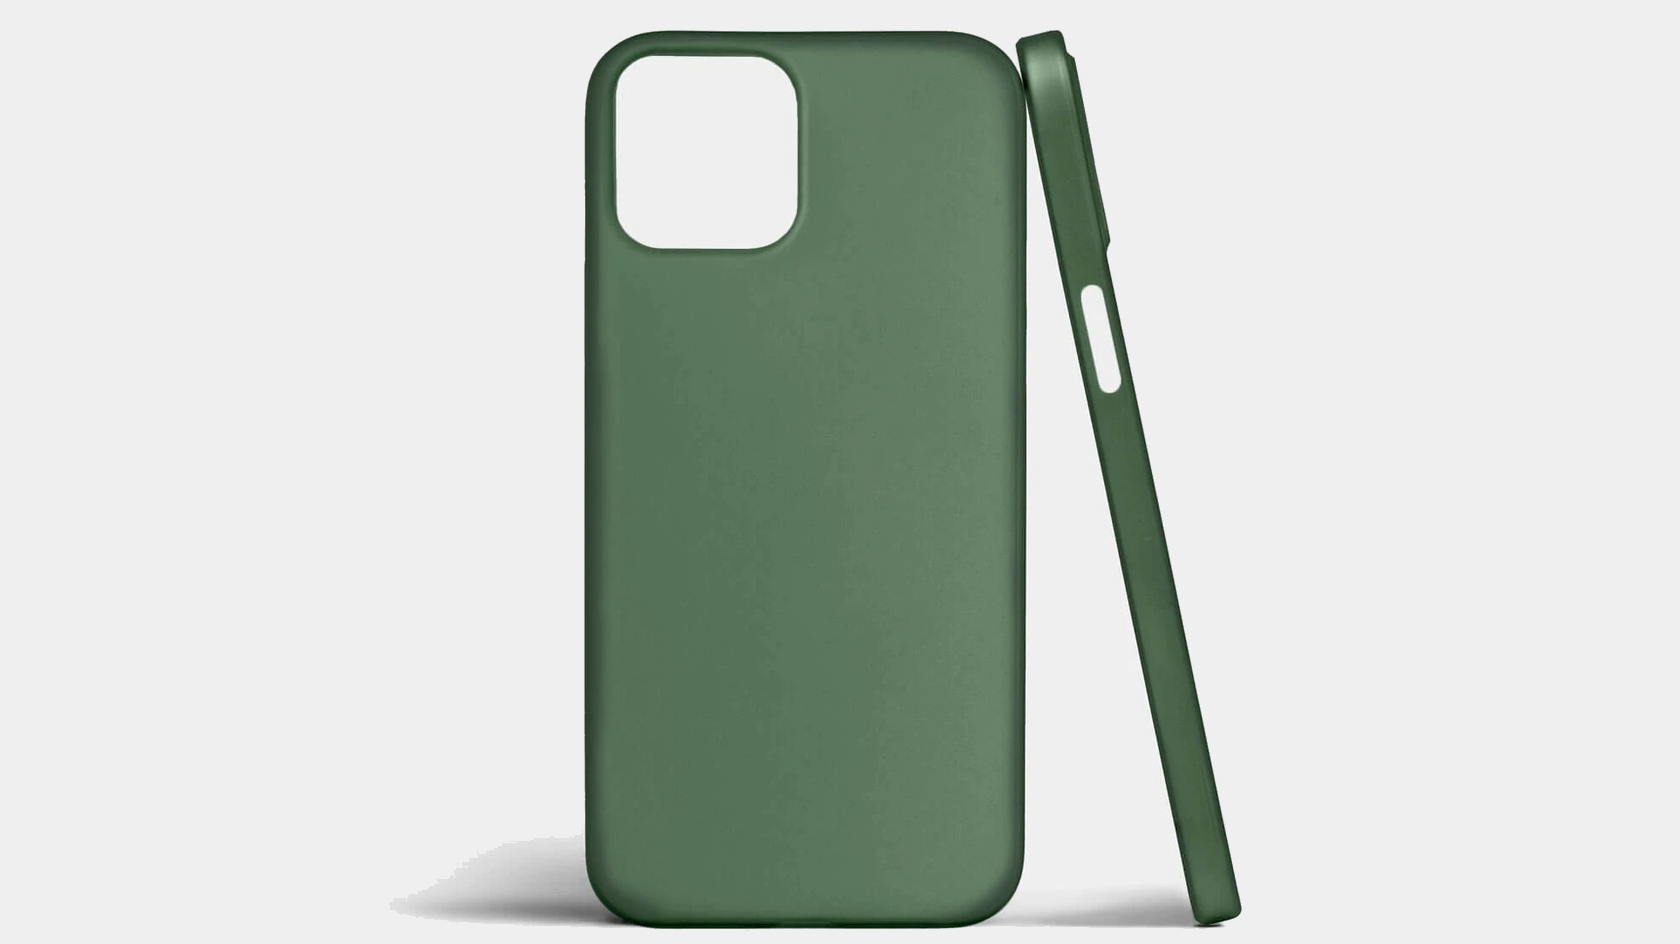 iPhone 12 range cases hint at the design and cameras of the upcoming